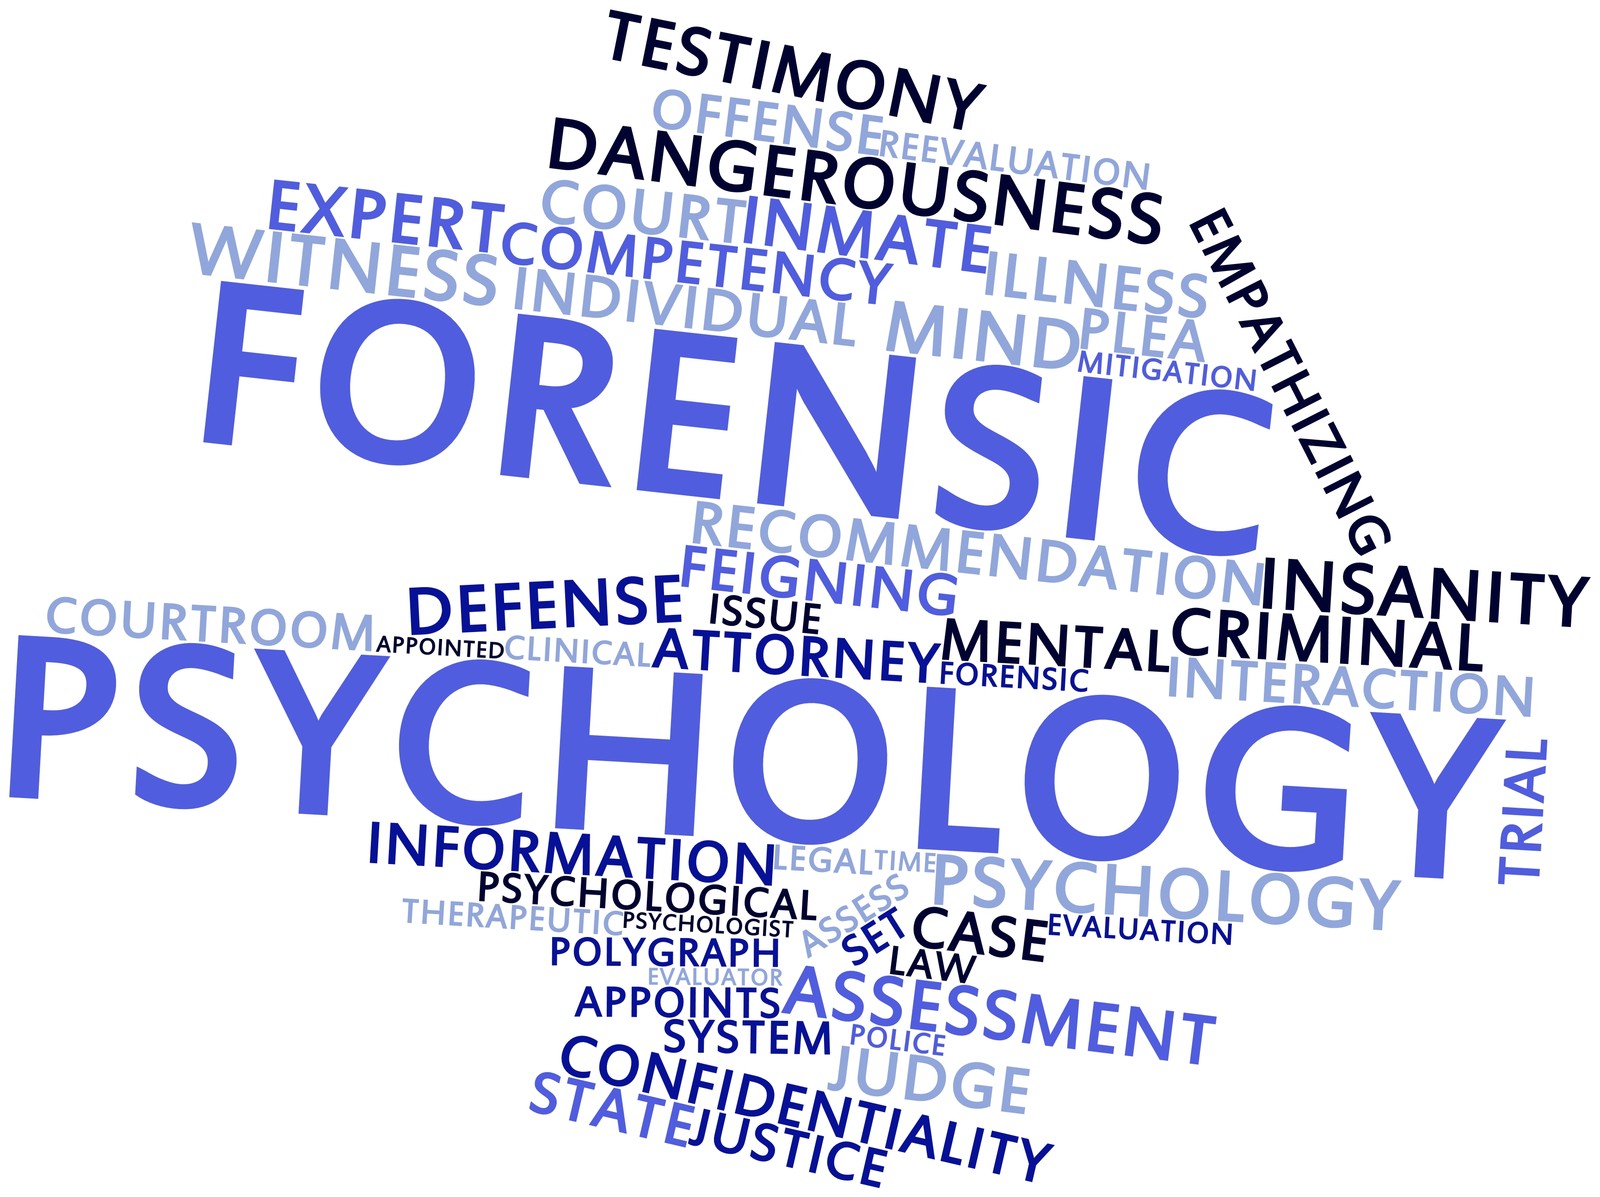 Forensic Criminology Forensic Psychology And Psychologists